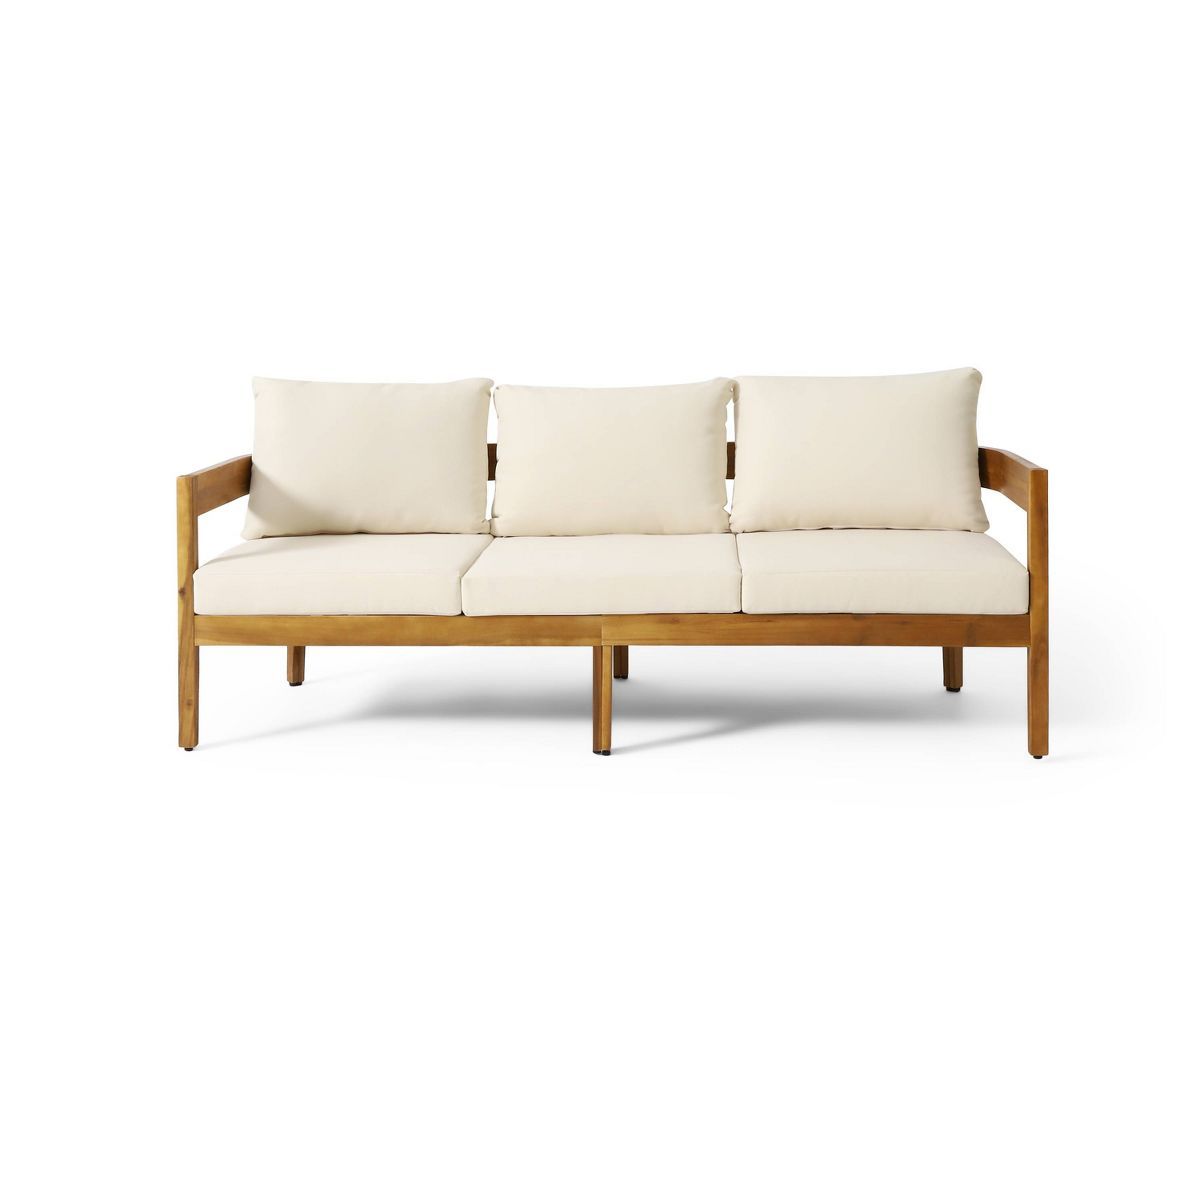 Brooklyn Outdoor Acacia Wood 3 Seat Sofa with Cushions Teak/Beige - Christopher Knight Home | Target